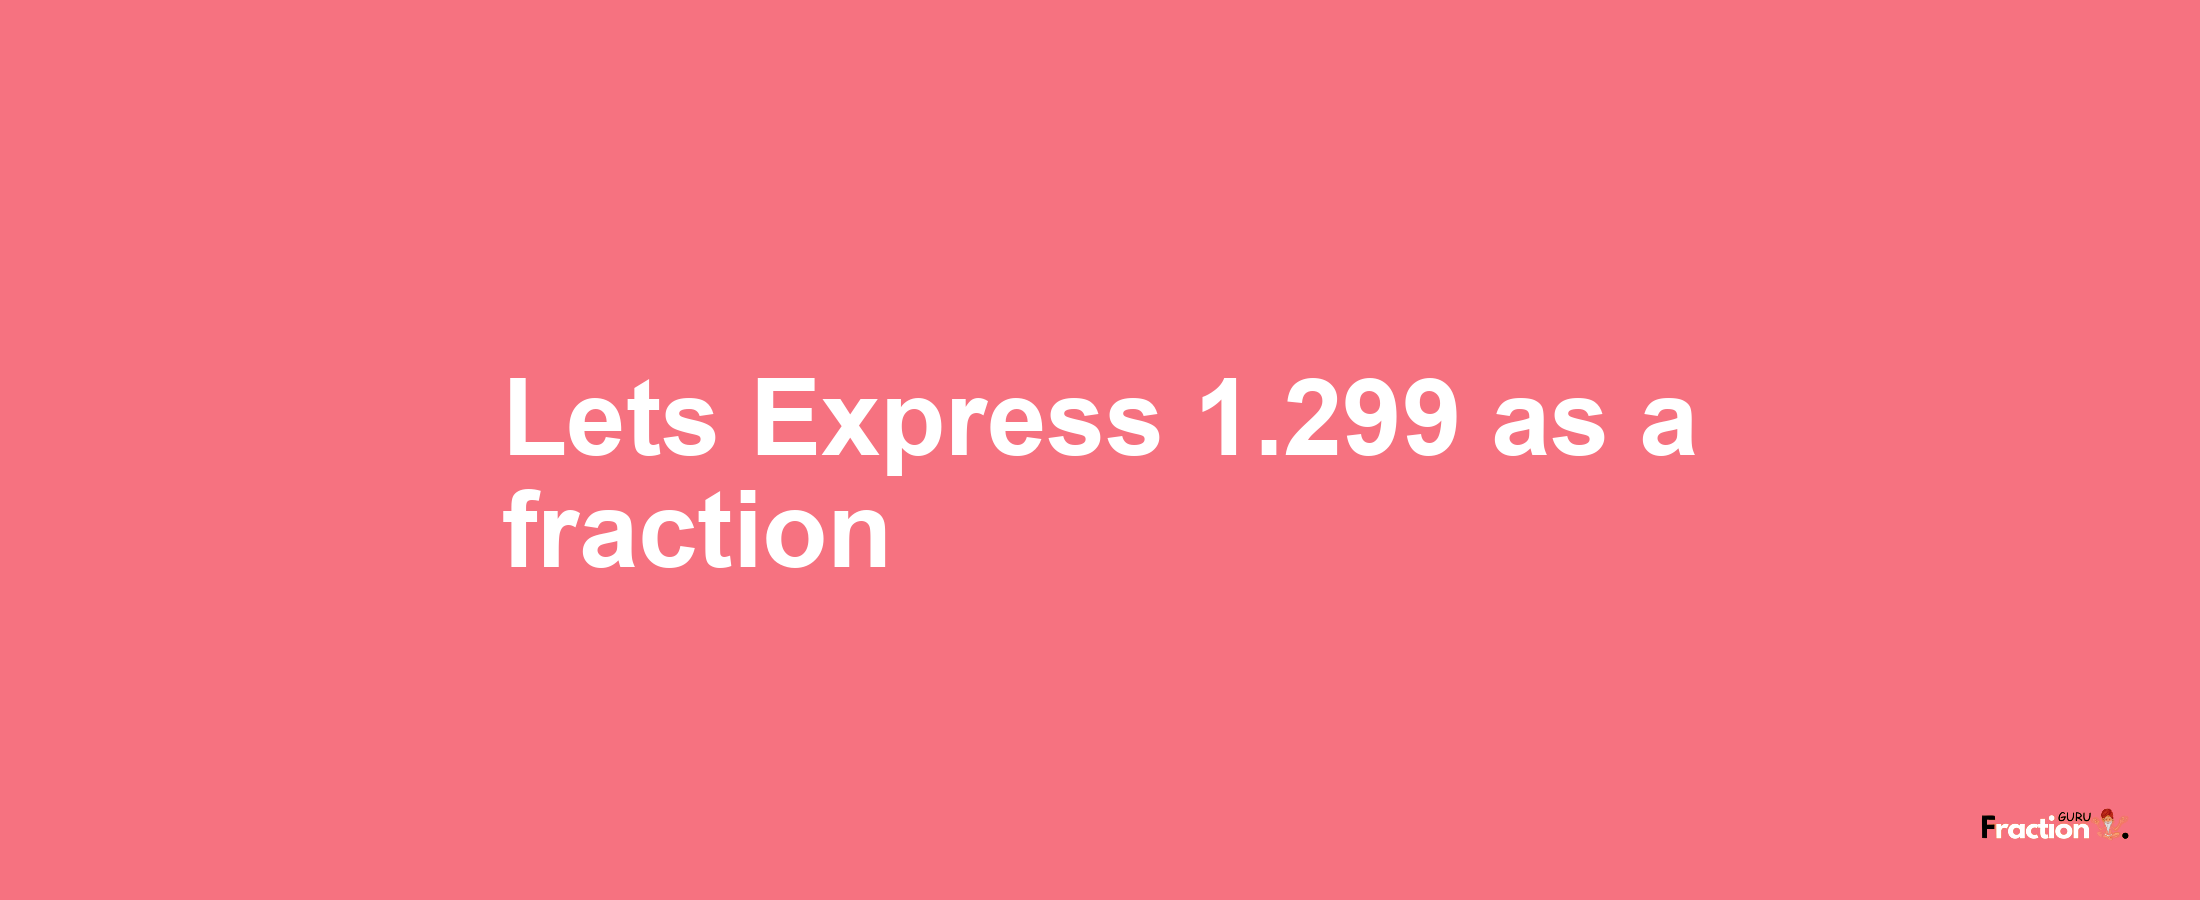 Lets Express 1.299 as afraction